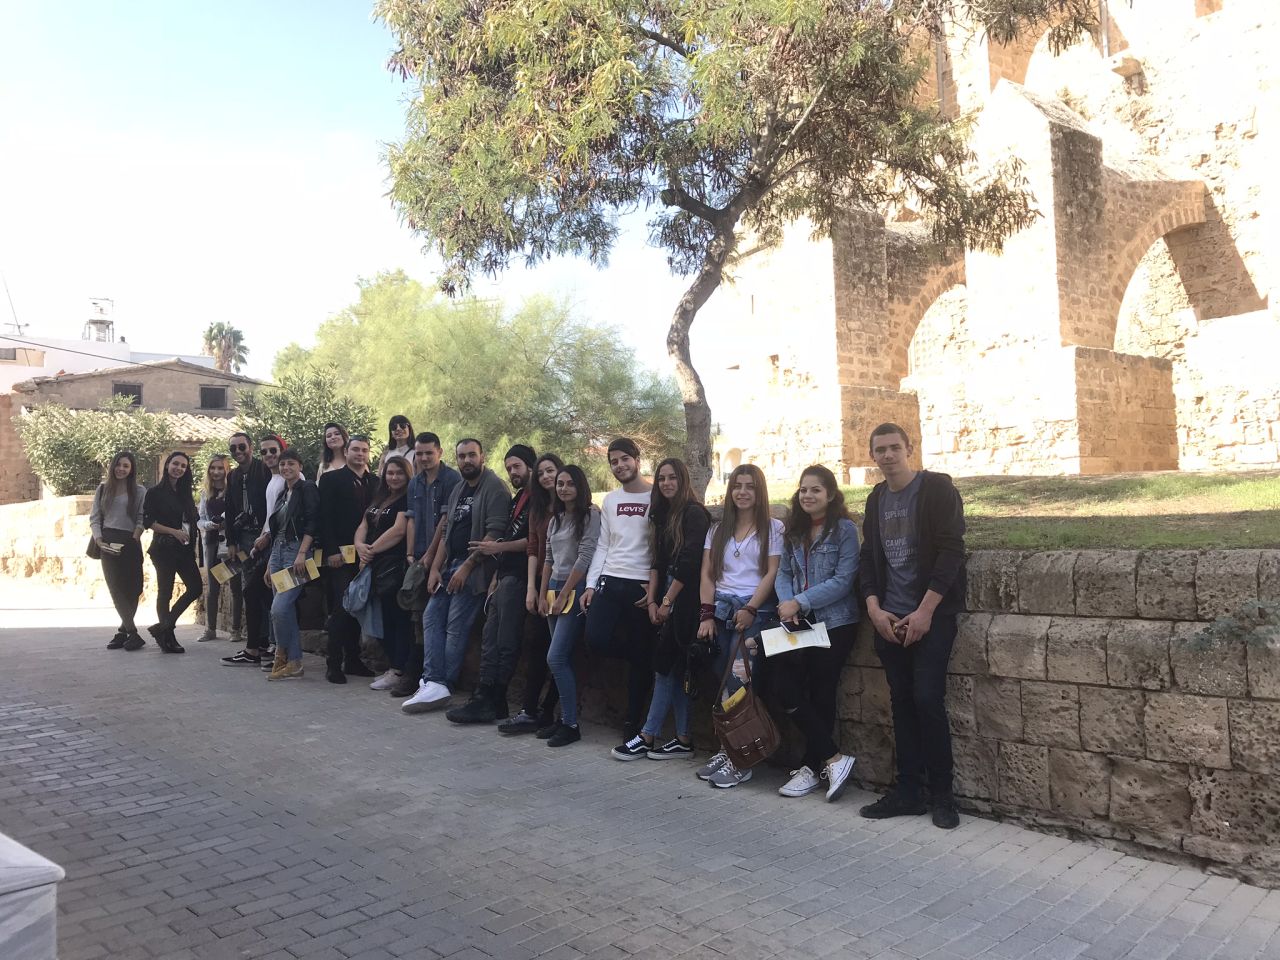 Near East University Faculty of Communication, Department of Visual Communication and Design held a research expedition to Famagusta regarding “City Aesthetics”